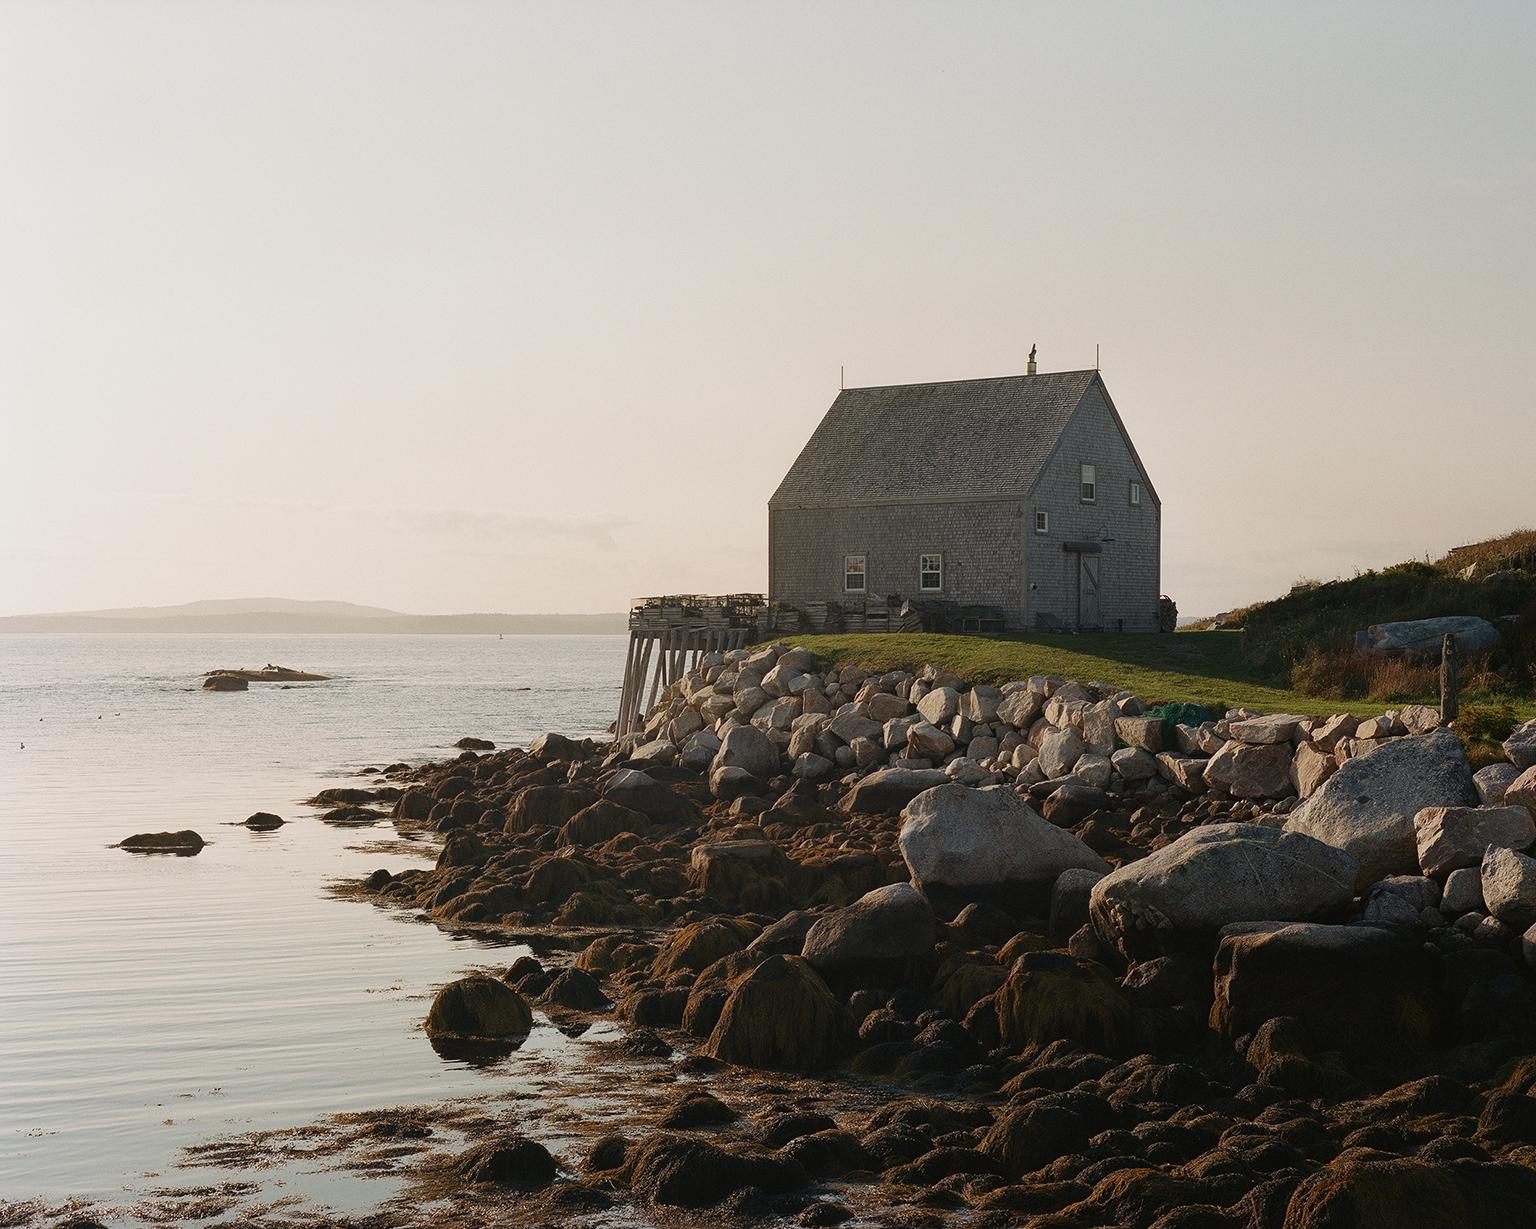 Cottage, Nova Scotia, Canada., 2021, Archival Dye Piment Print. 24” x 30”, Edition of 15.
_________________________________________________________________________________
Signed, Dated and Numbered on the Reverse.

Jim Ryce has focused on the